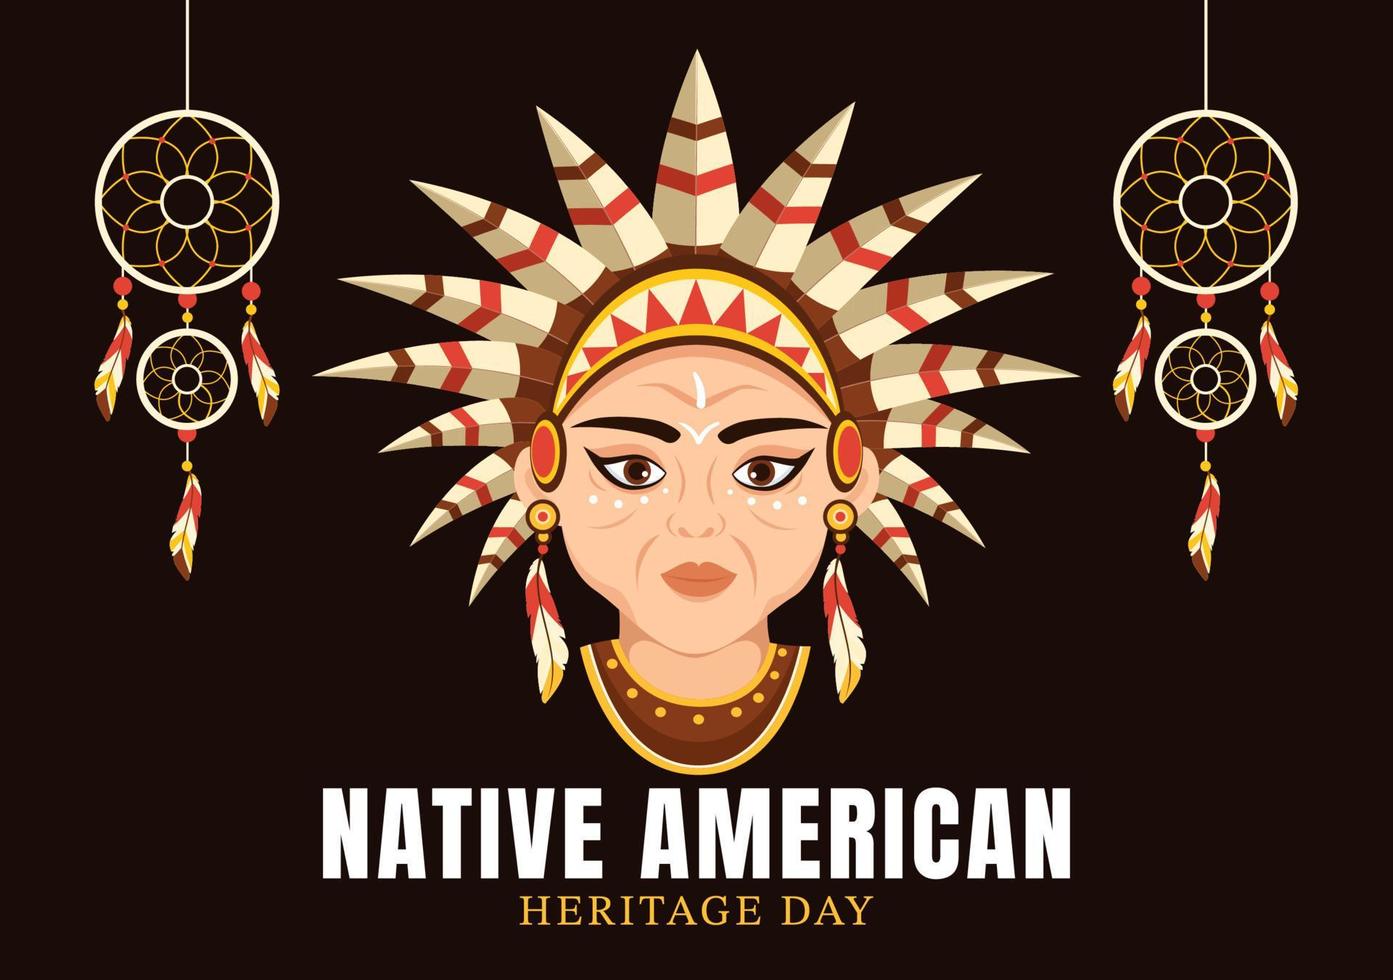 Native American Heritage Day Template Hand Drawn Cartoon Flat Illustration to Recognize the Achievements and Contributions of Tribal Indian Culture vector